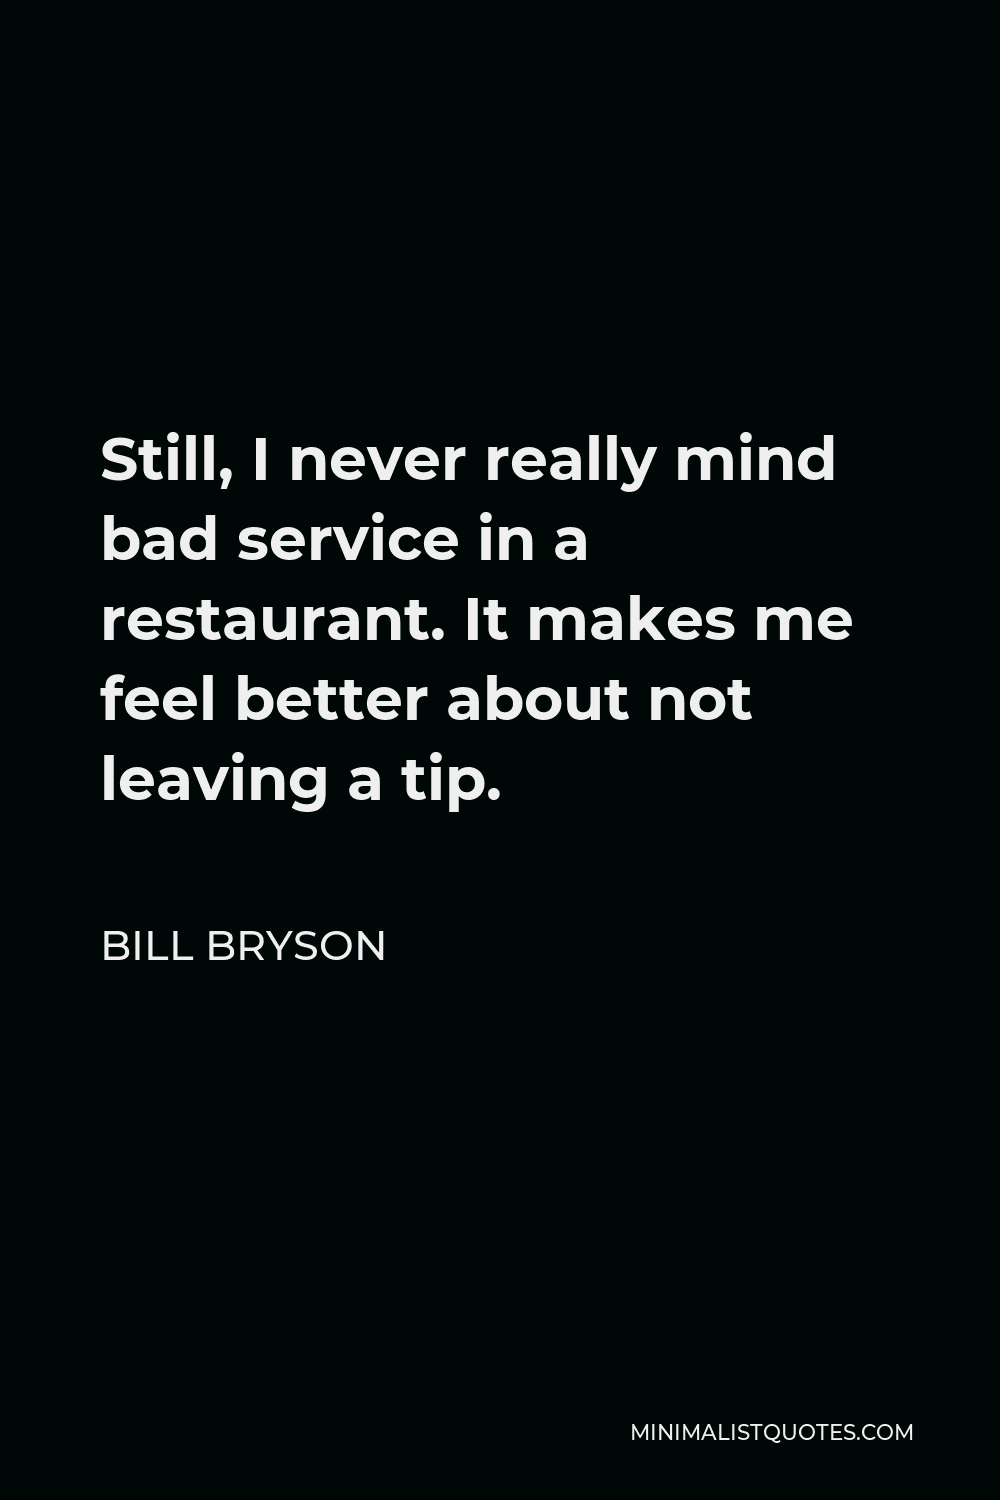 Bill Bryson Quote - Still, I never really mind bad service in a restaurant. It makes me feel better about not leaving a tip.